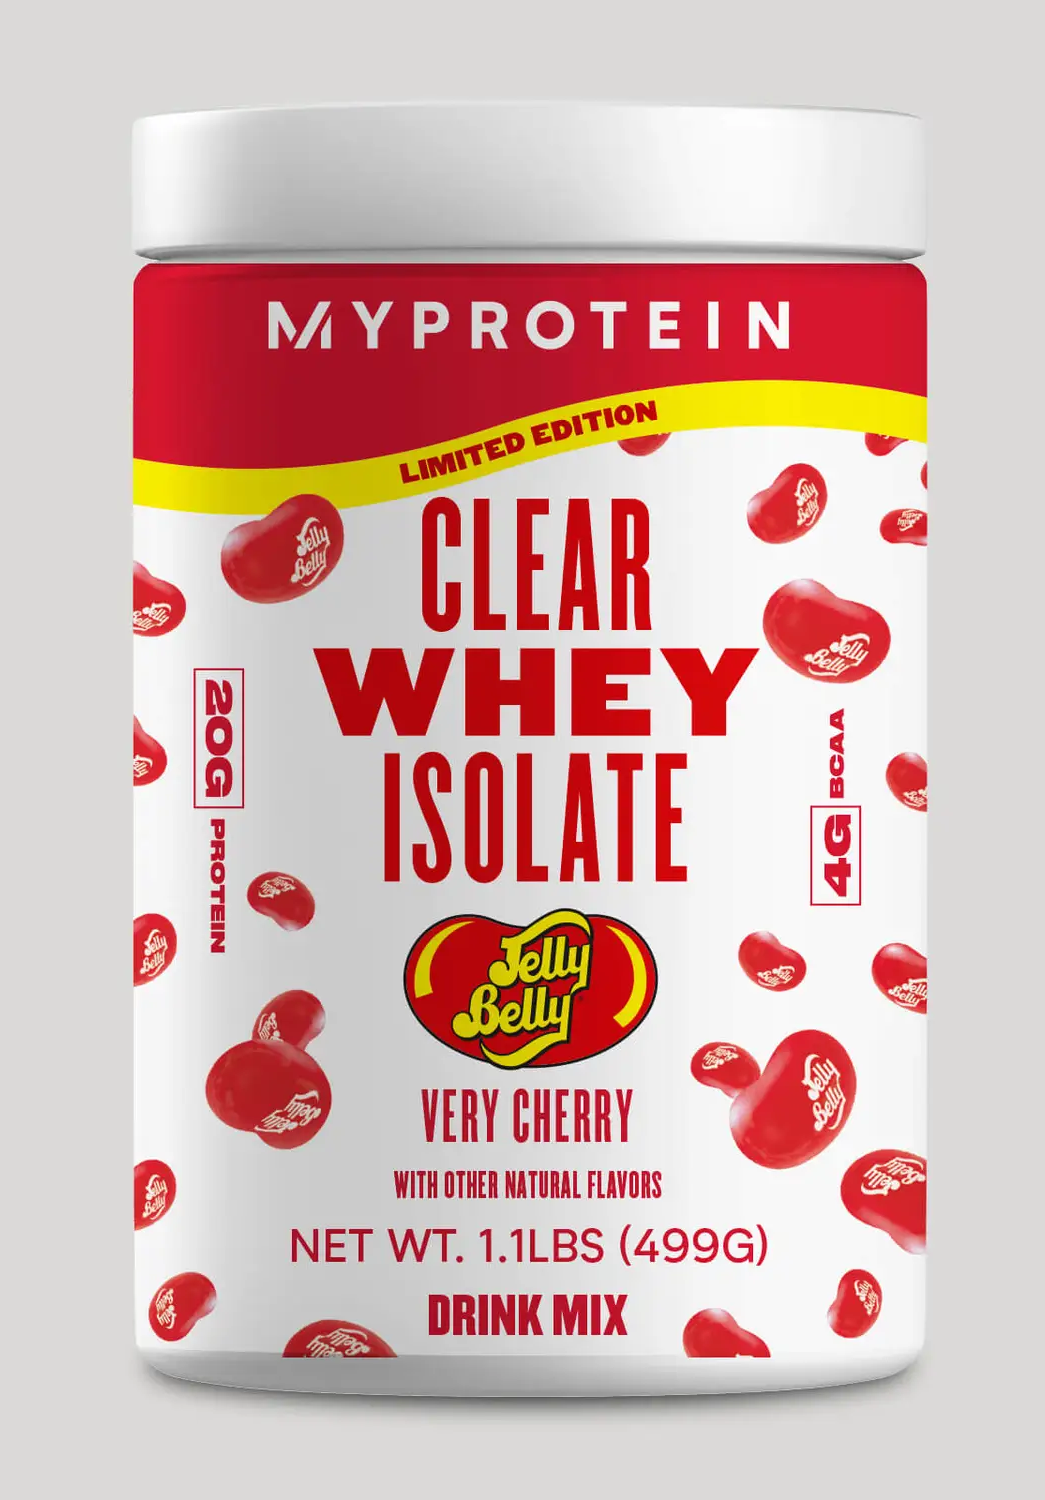 Myprotein Clear Whey Isolate Jelly Belly Very Cherry